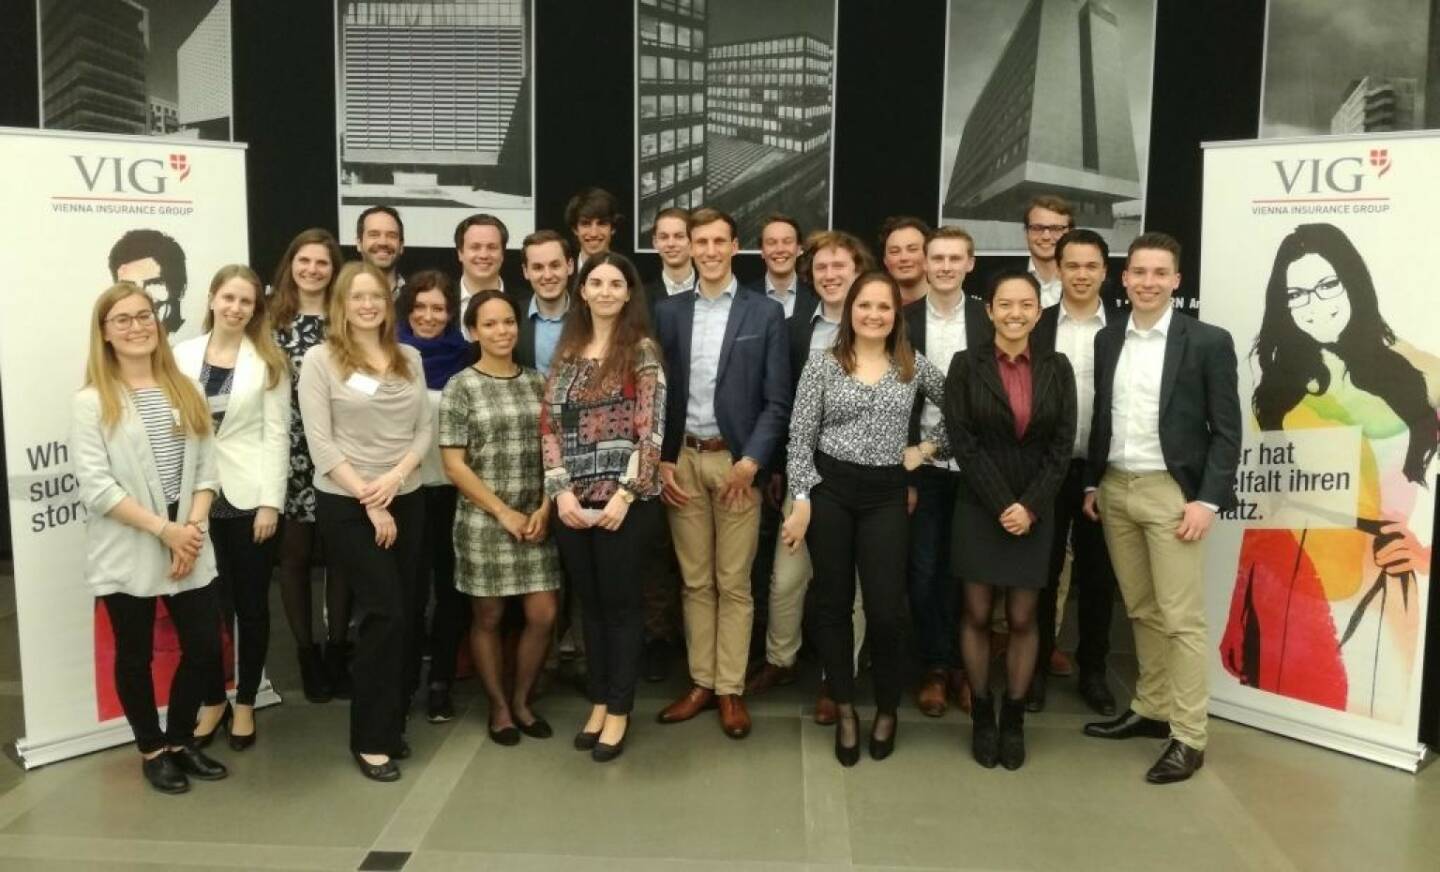 VIG - Students from the Erasmus University Rotterdam visited VIG and spoke to colleagues from our Actuarial Services, Risk Management and Asset Management departments. We offered informal talks with our colleagues to introduce these financial mathematicians to potential fields of work. So why not VIG?